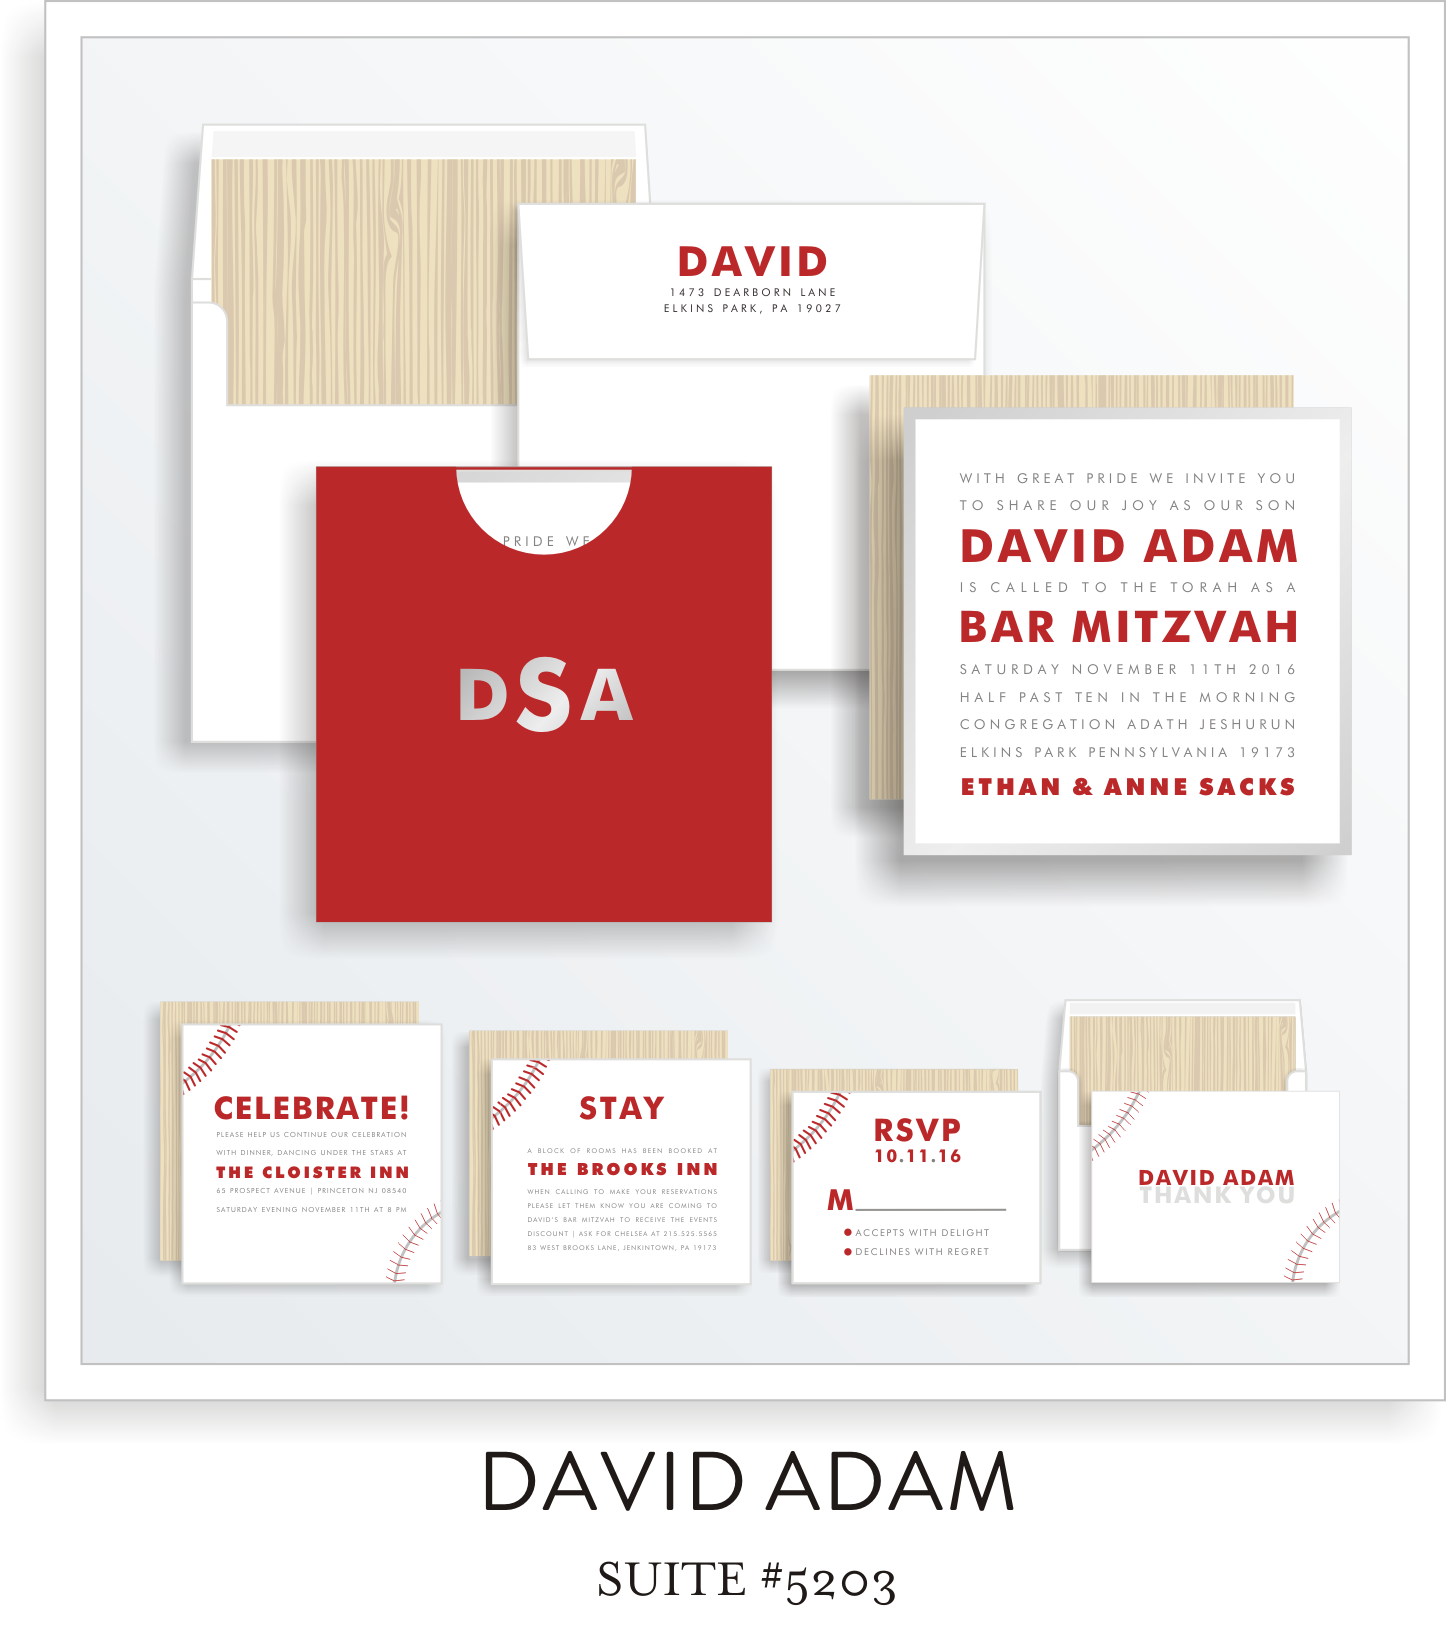 Copy of Copy of <a href=/bar-mitzvah-invitations-5203>Suite Details→</a><strong><a href=/david-adam-in-colors>see more colors→</a></strong>